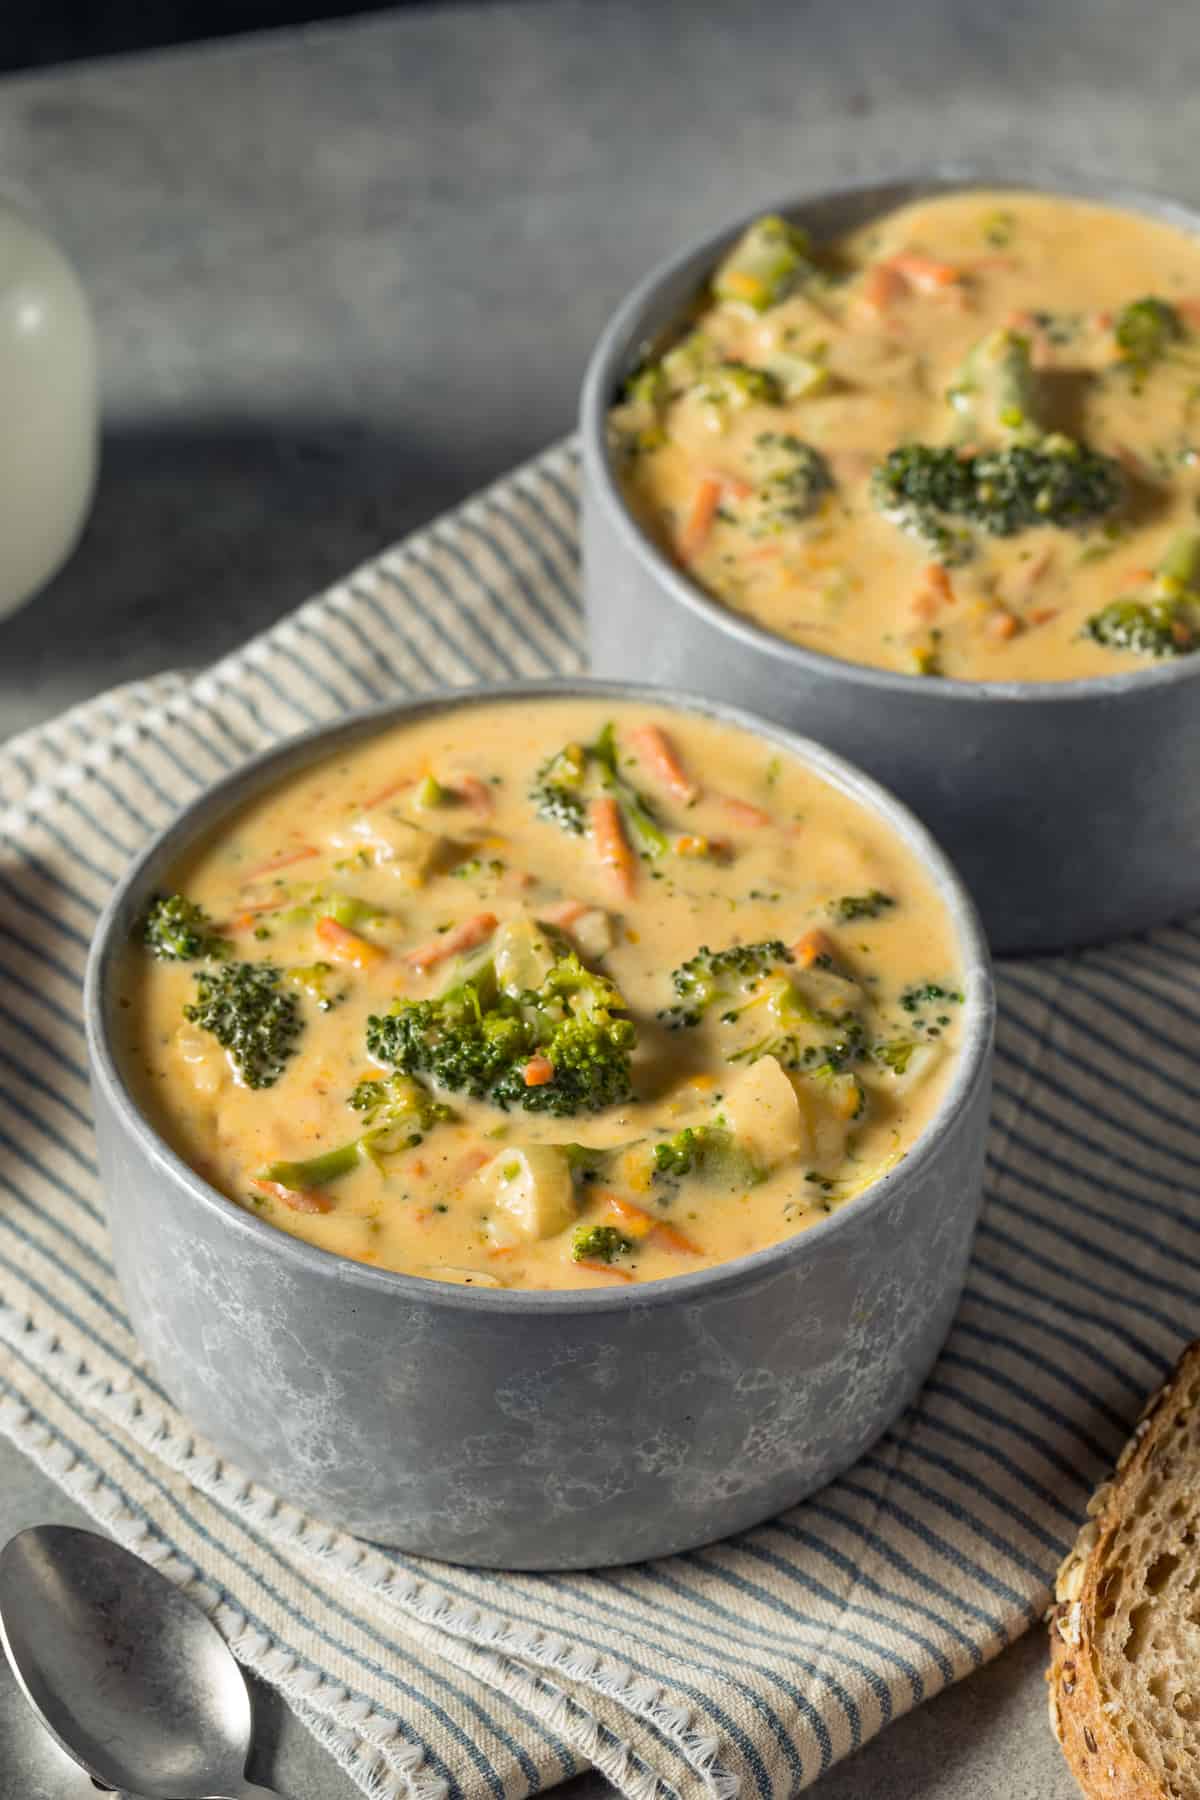 Two bowls of broccoli cheese soup